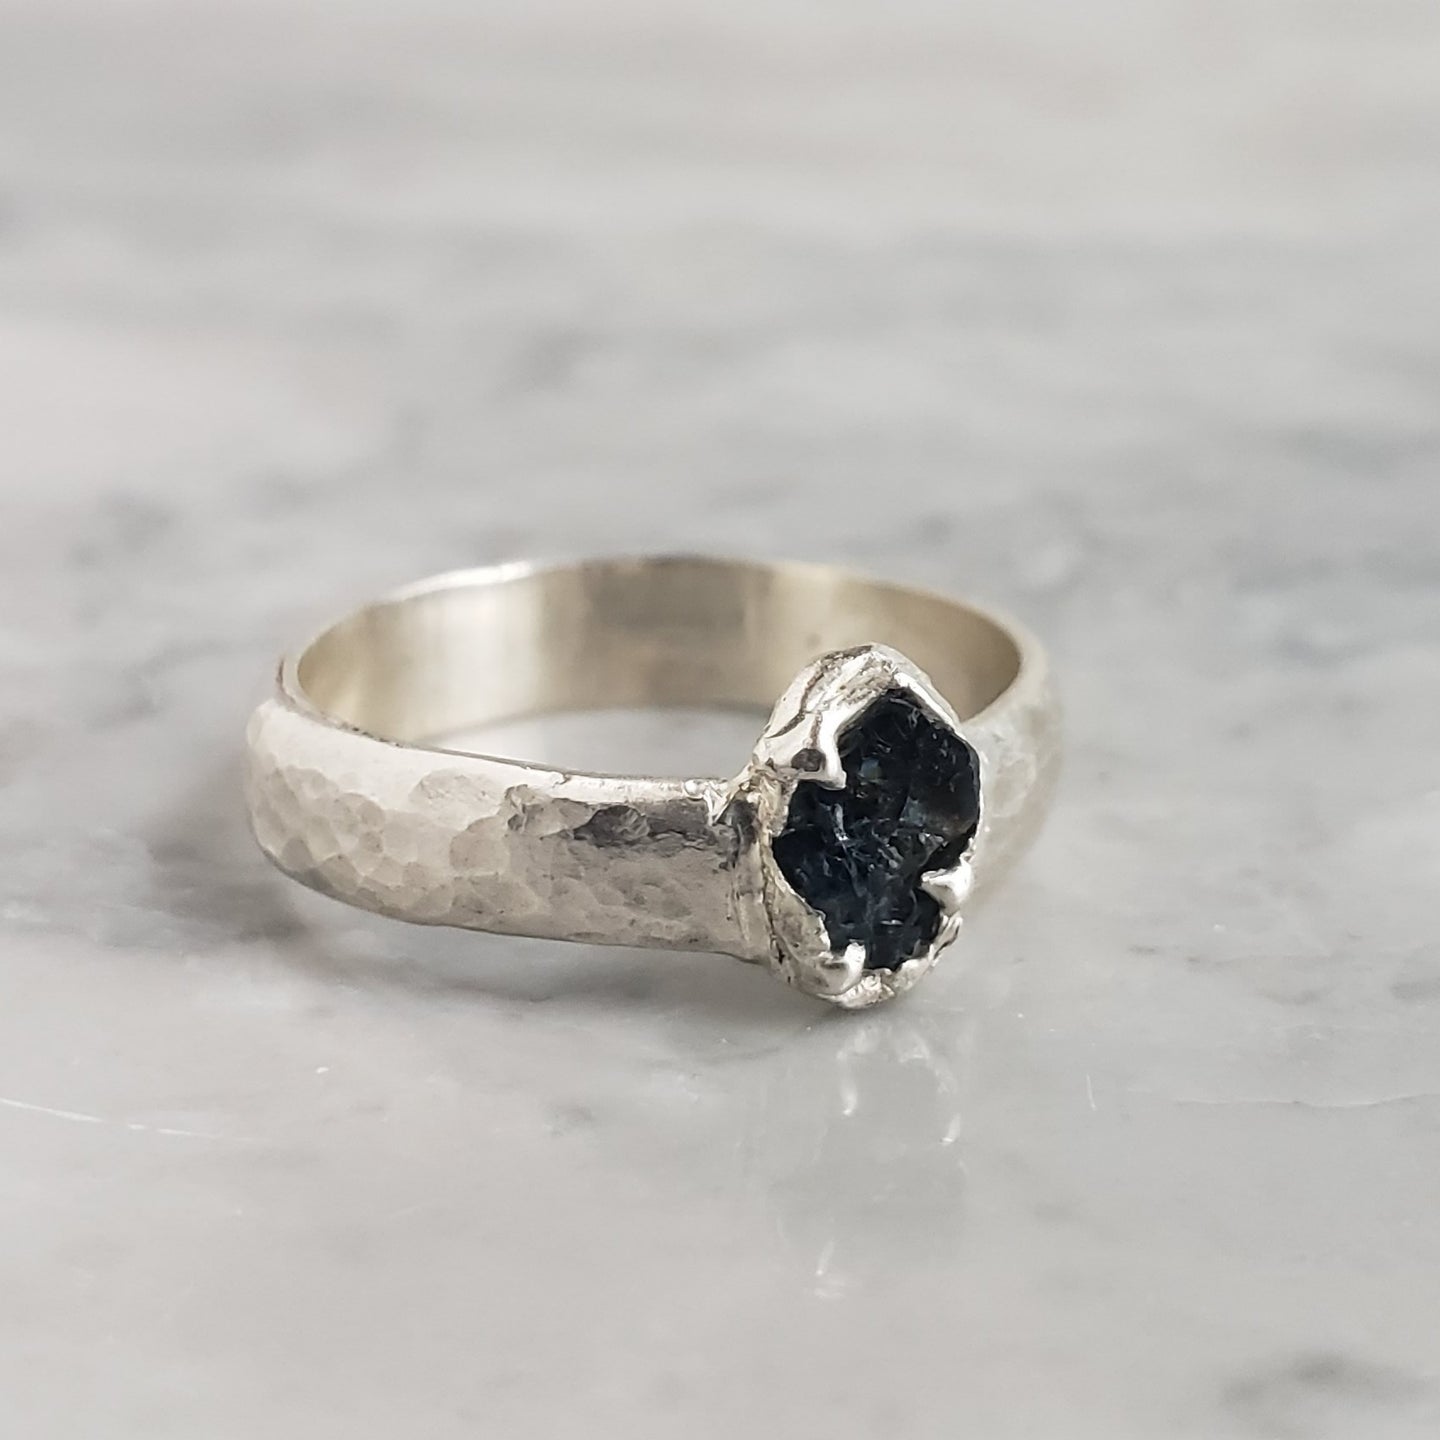 Rough Sapphire Ring, Silver